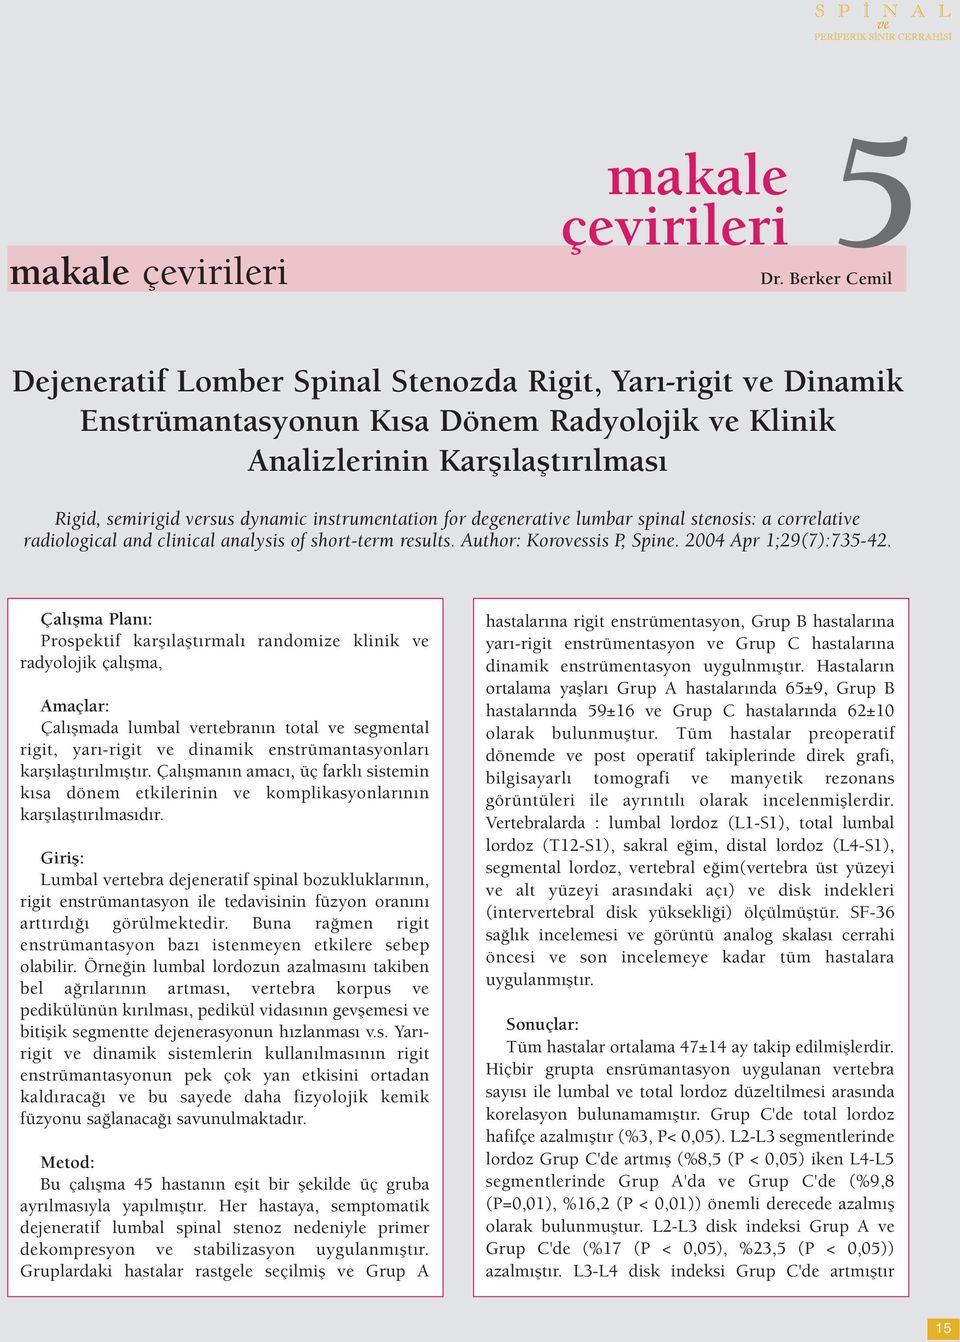 instrumentation for degenerative lumbar spinal stenosis: a correlative radiological and clinical analysis of short-term results. Author: Korovessis P, Spine. 2004 Apr 1;29(7):735-42.